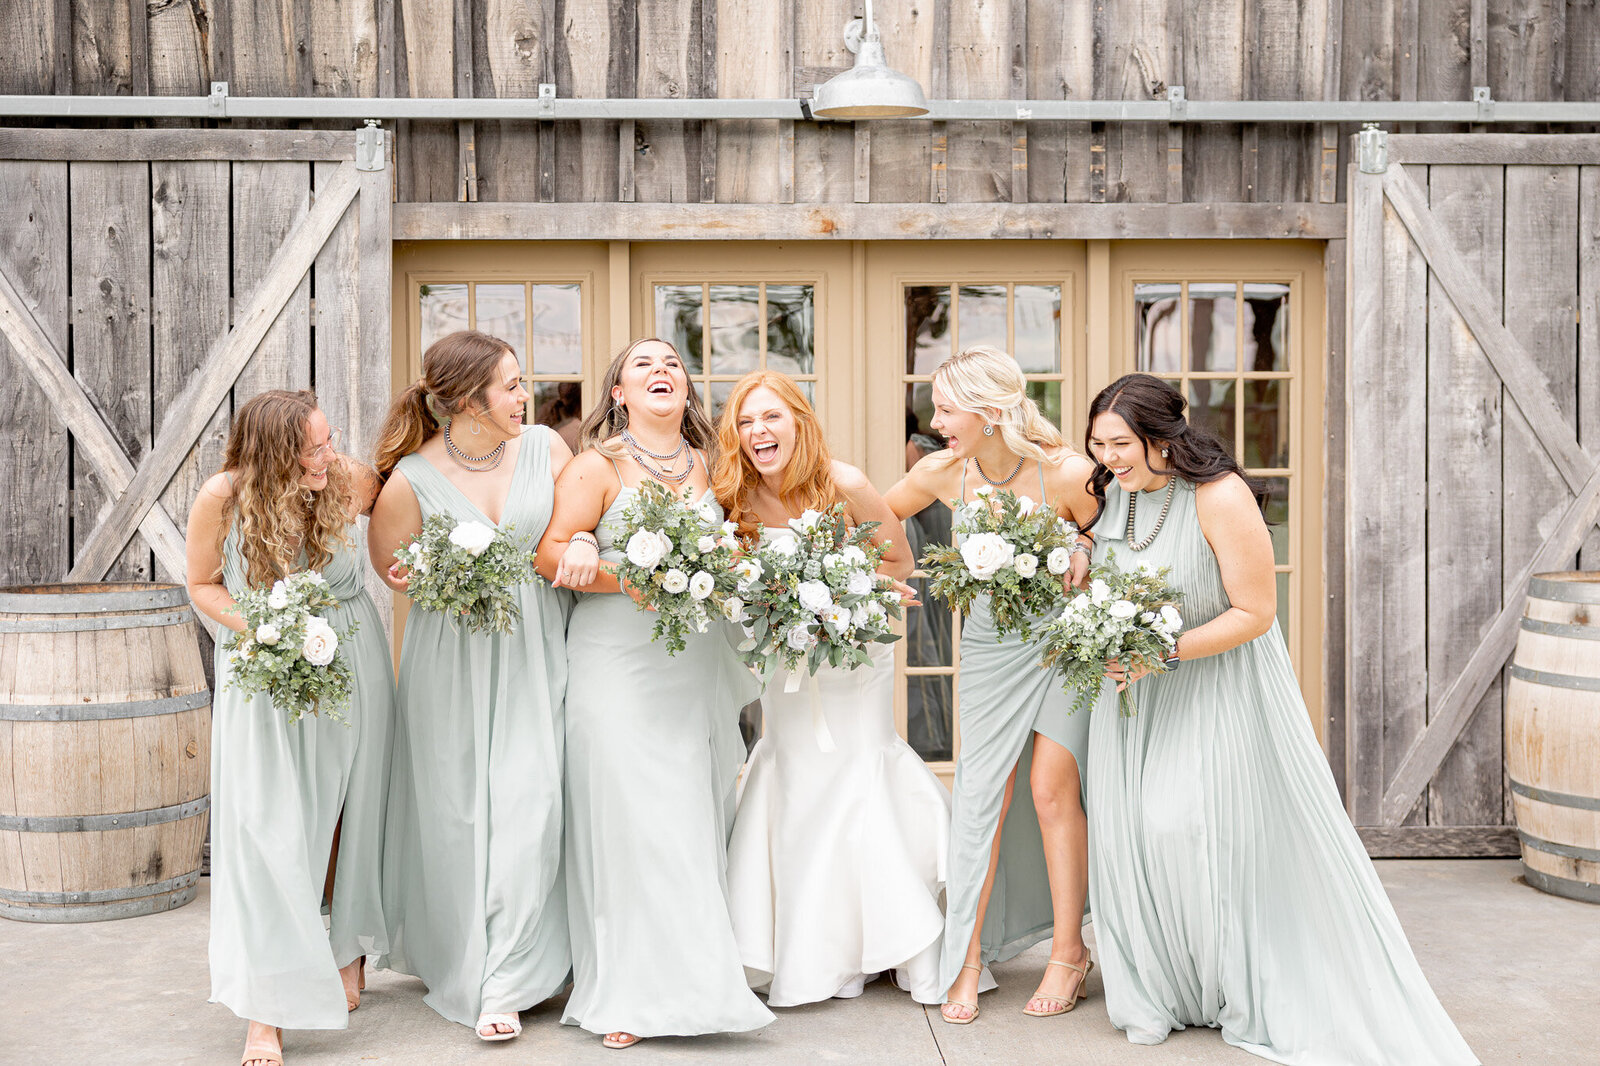 Rustic wedding at affordable barn venue in Muldrow Oklahoma at Stone Creek Bend